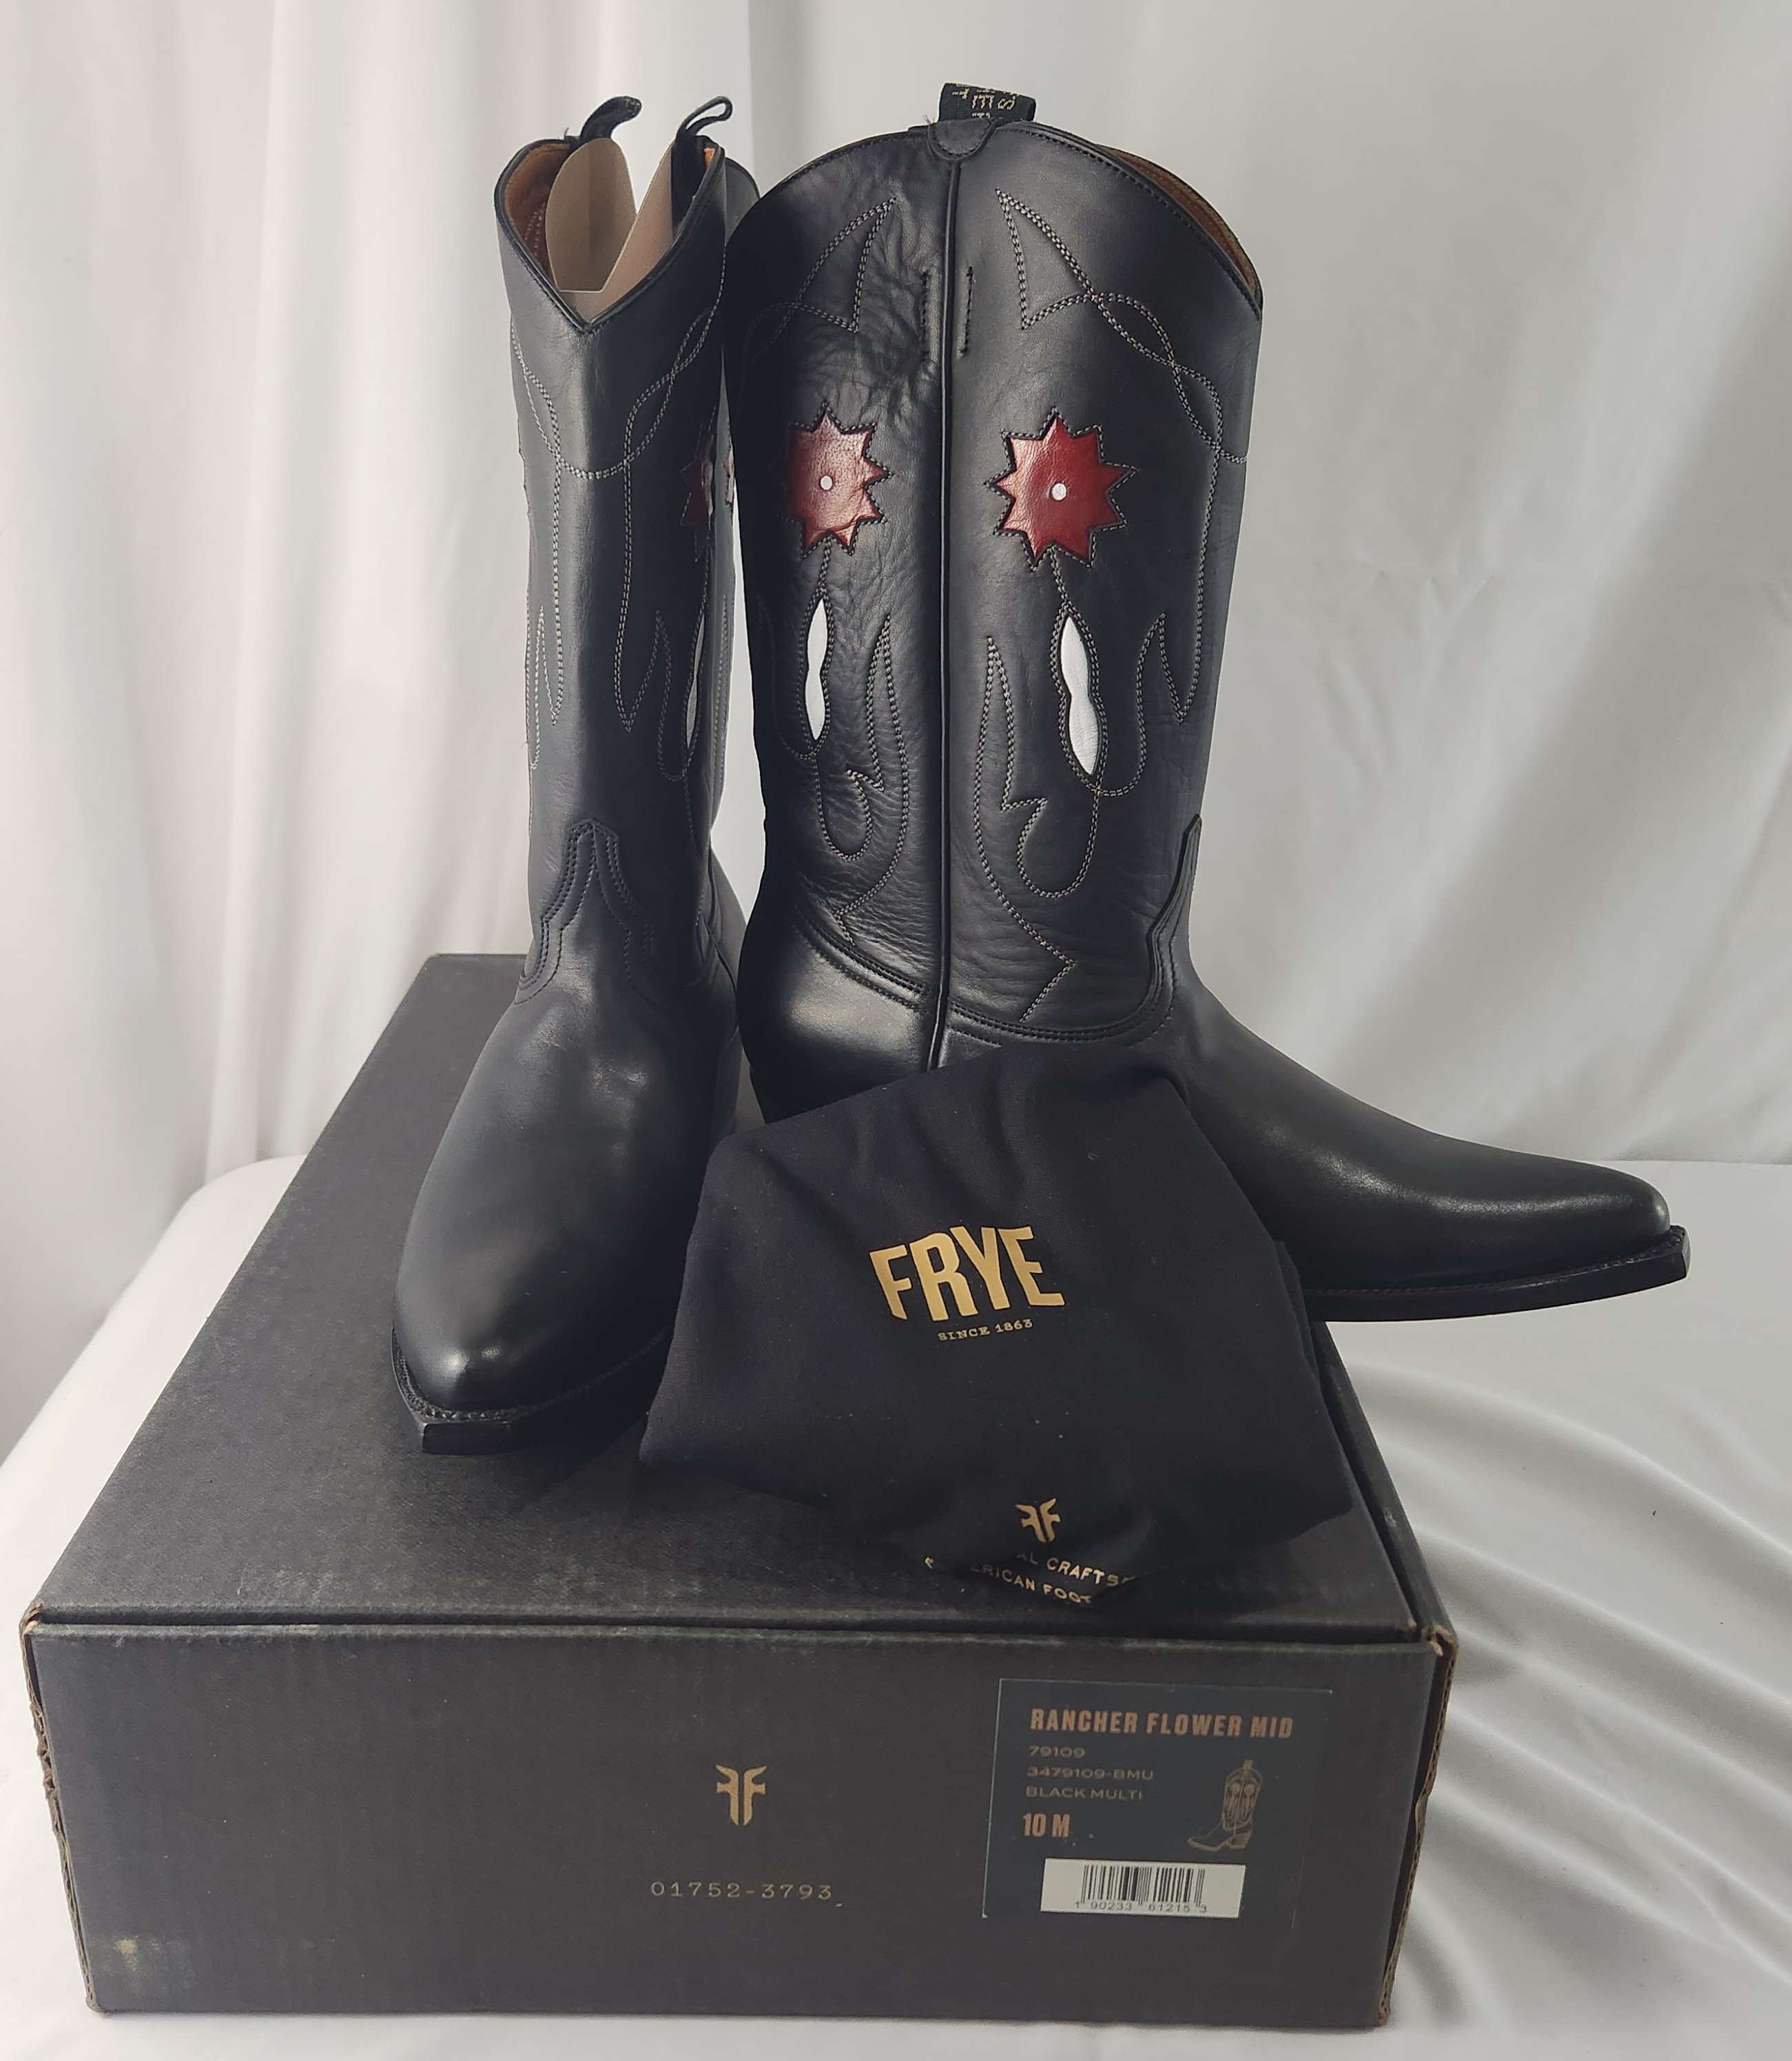 Vintage 1970s Frye Women's Riding Boots Size 6 1/2 - Storage Discoveries